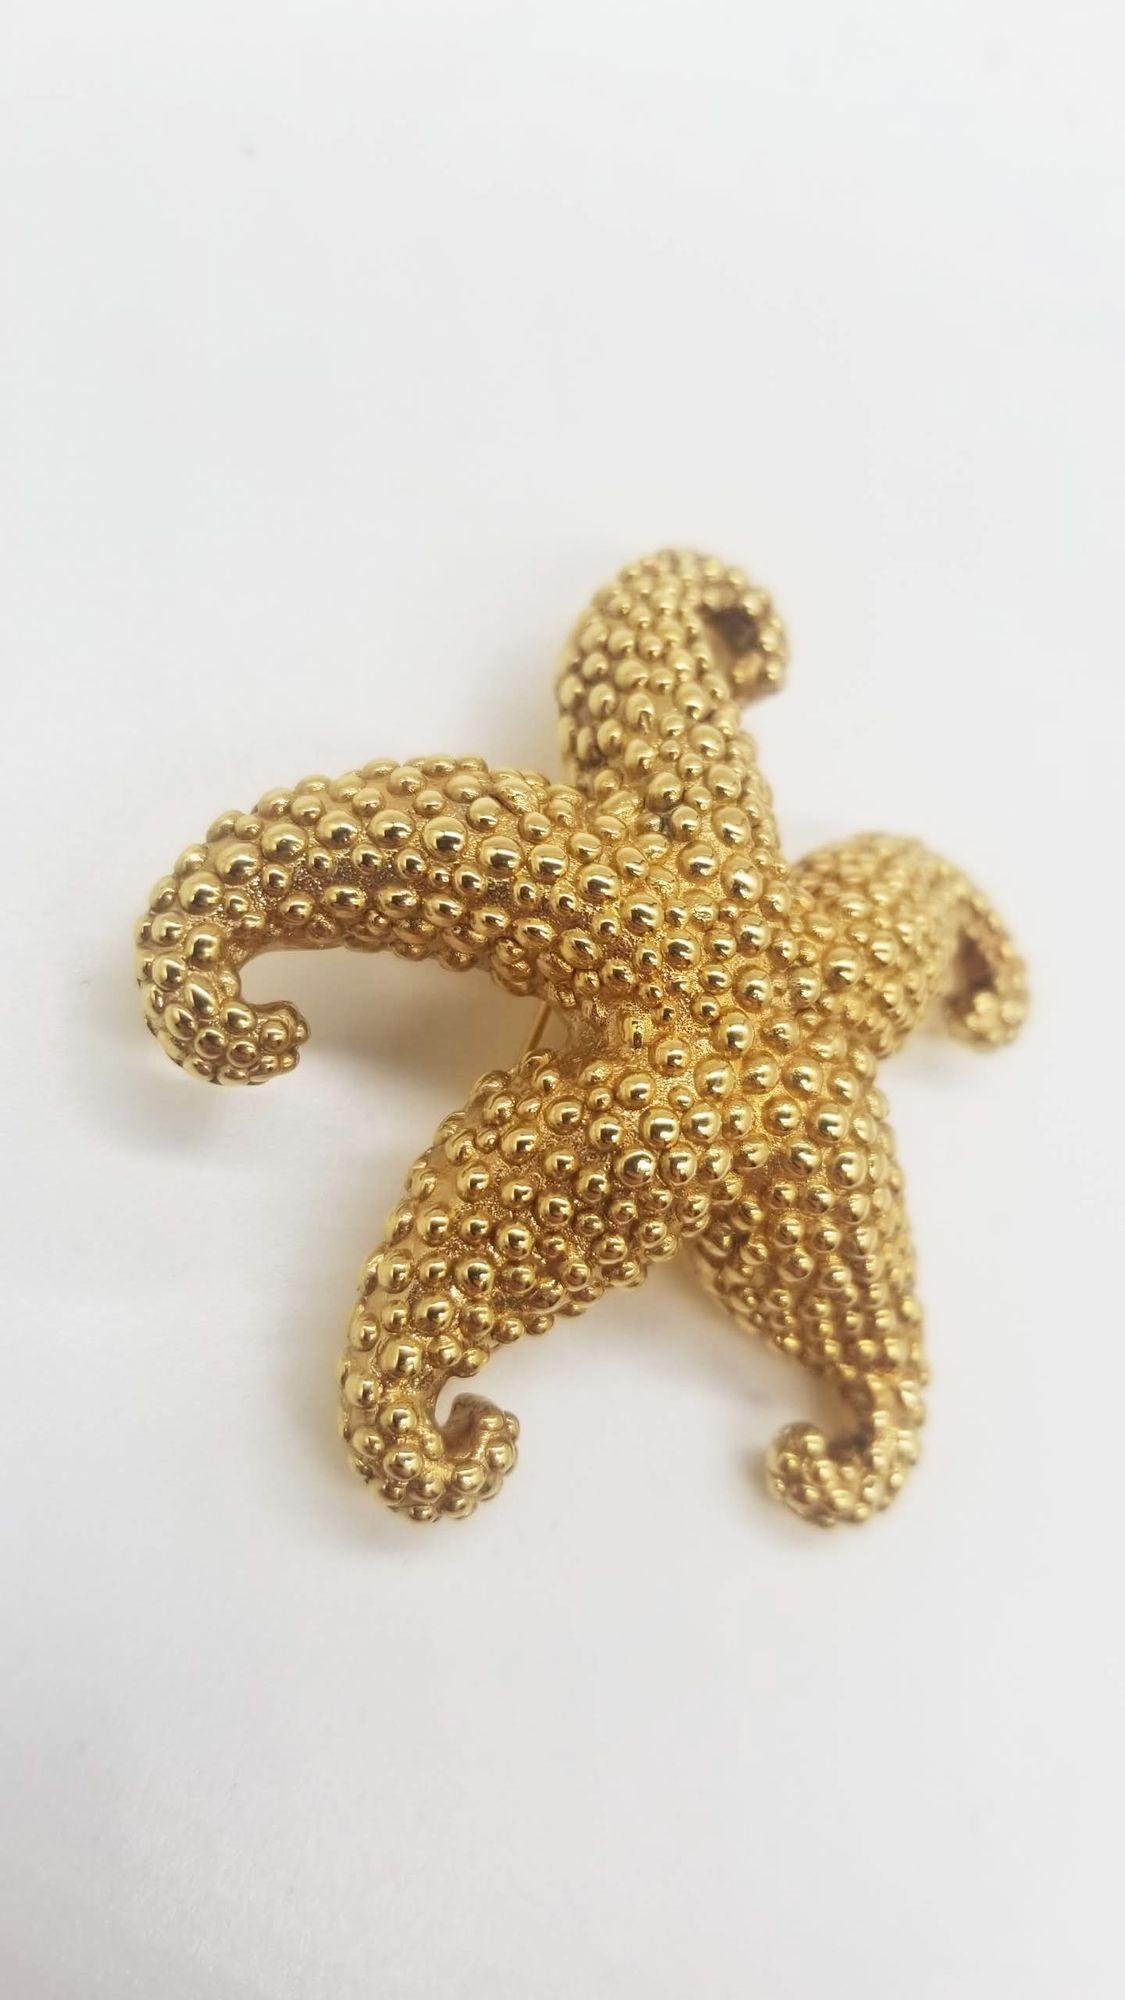 18K Gold Starfish Pin Brooch by Aya Azrielant In Excellent Condition For Sale In Van Nuys, CA